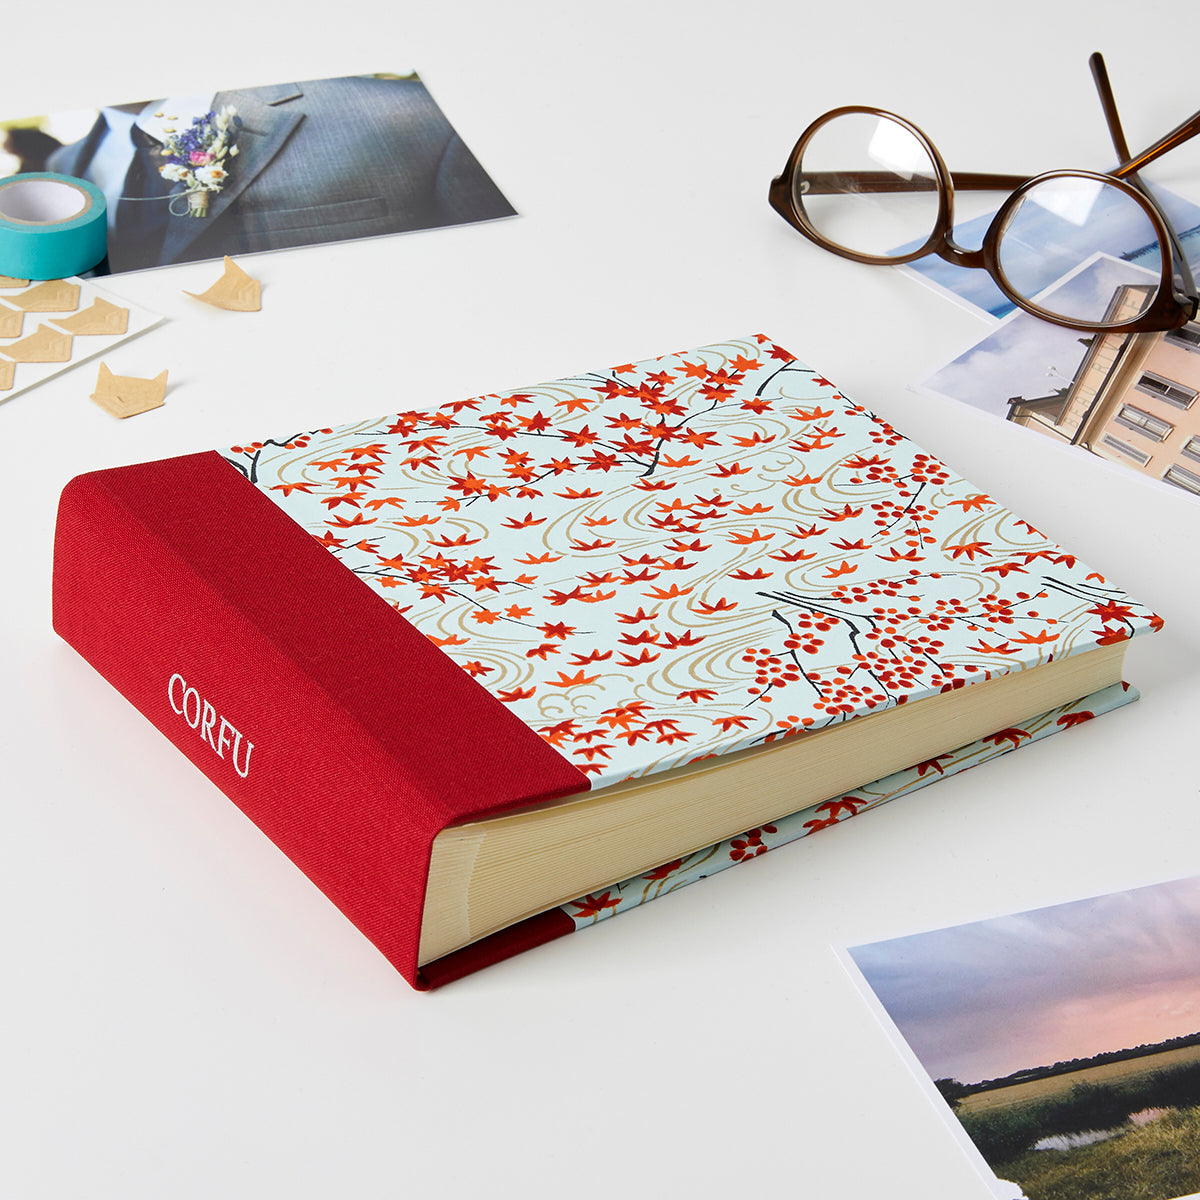 Patterned Photo Albums